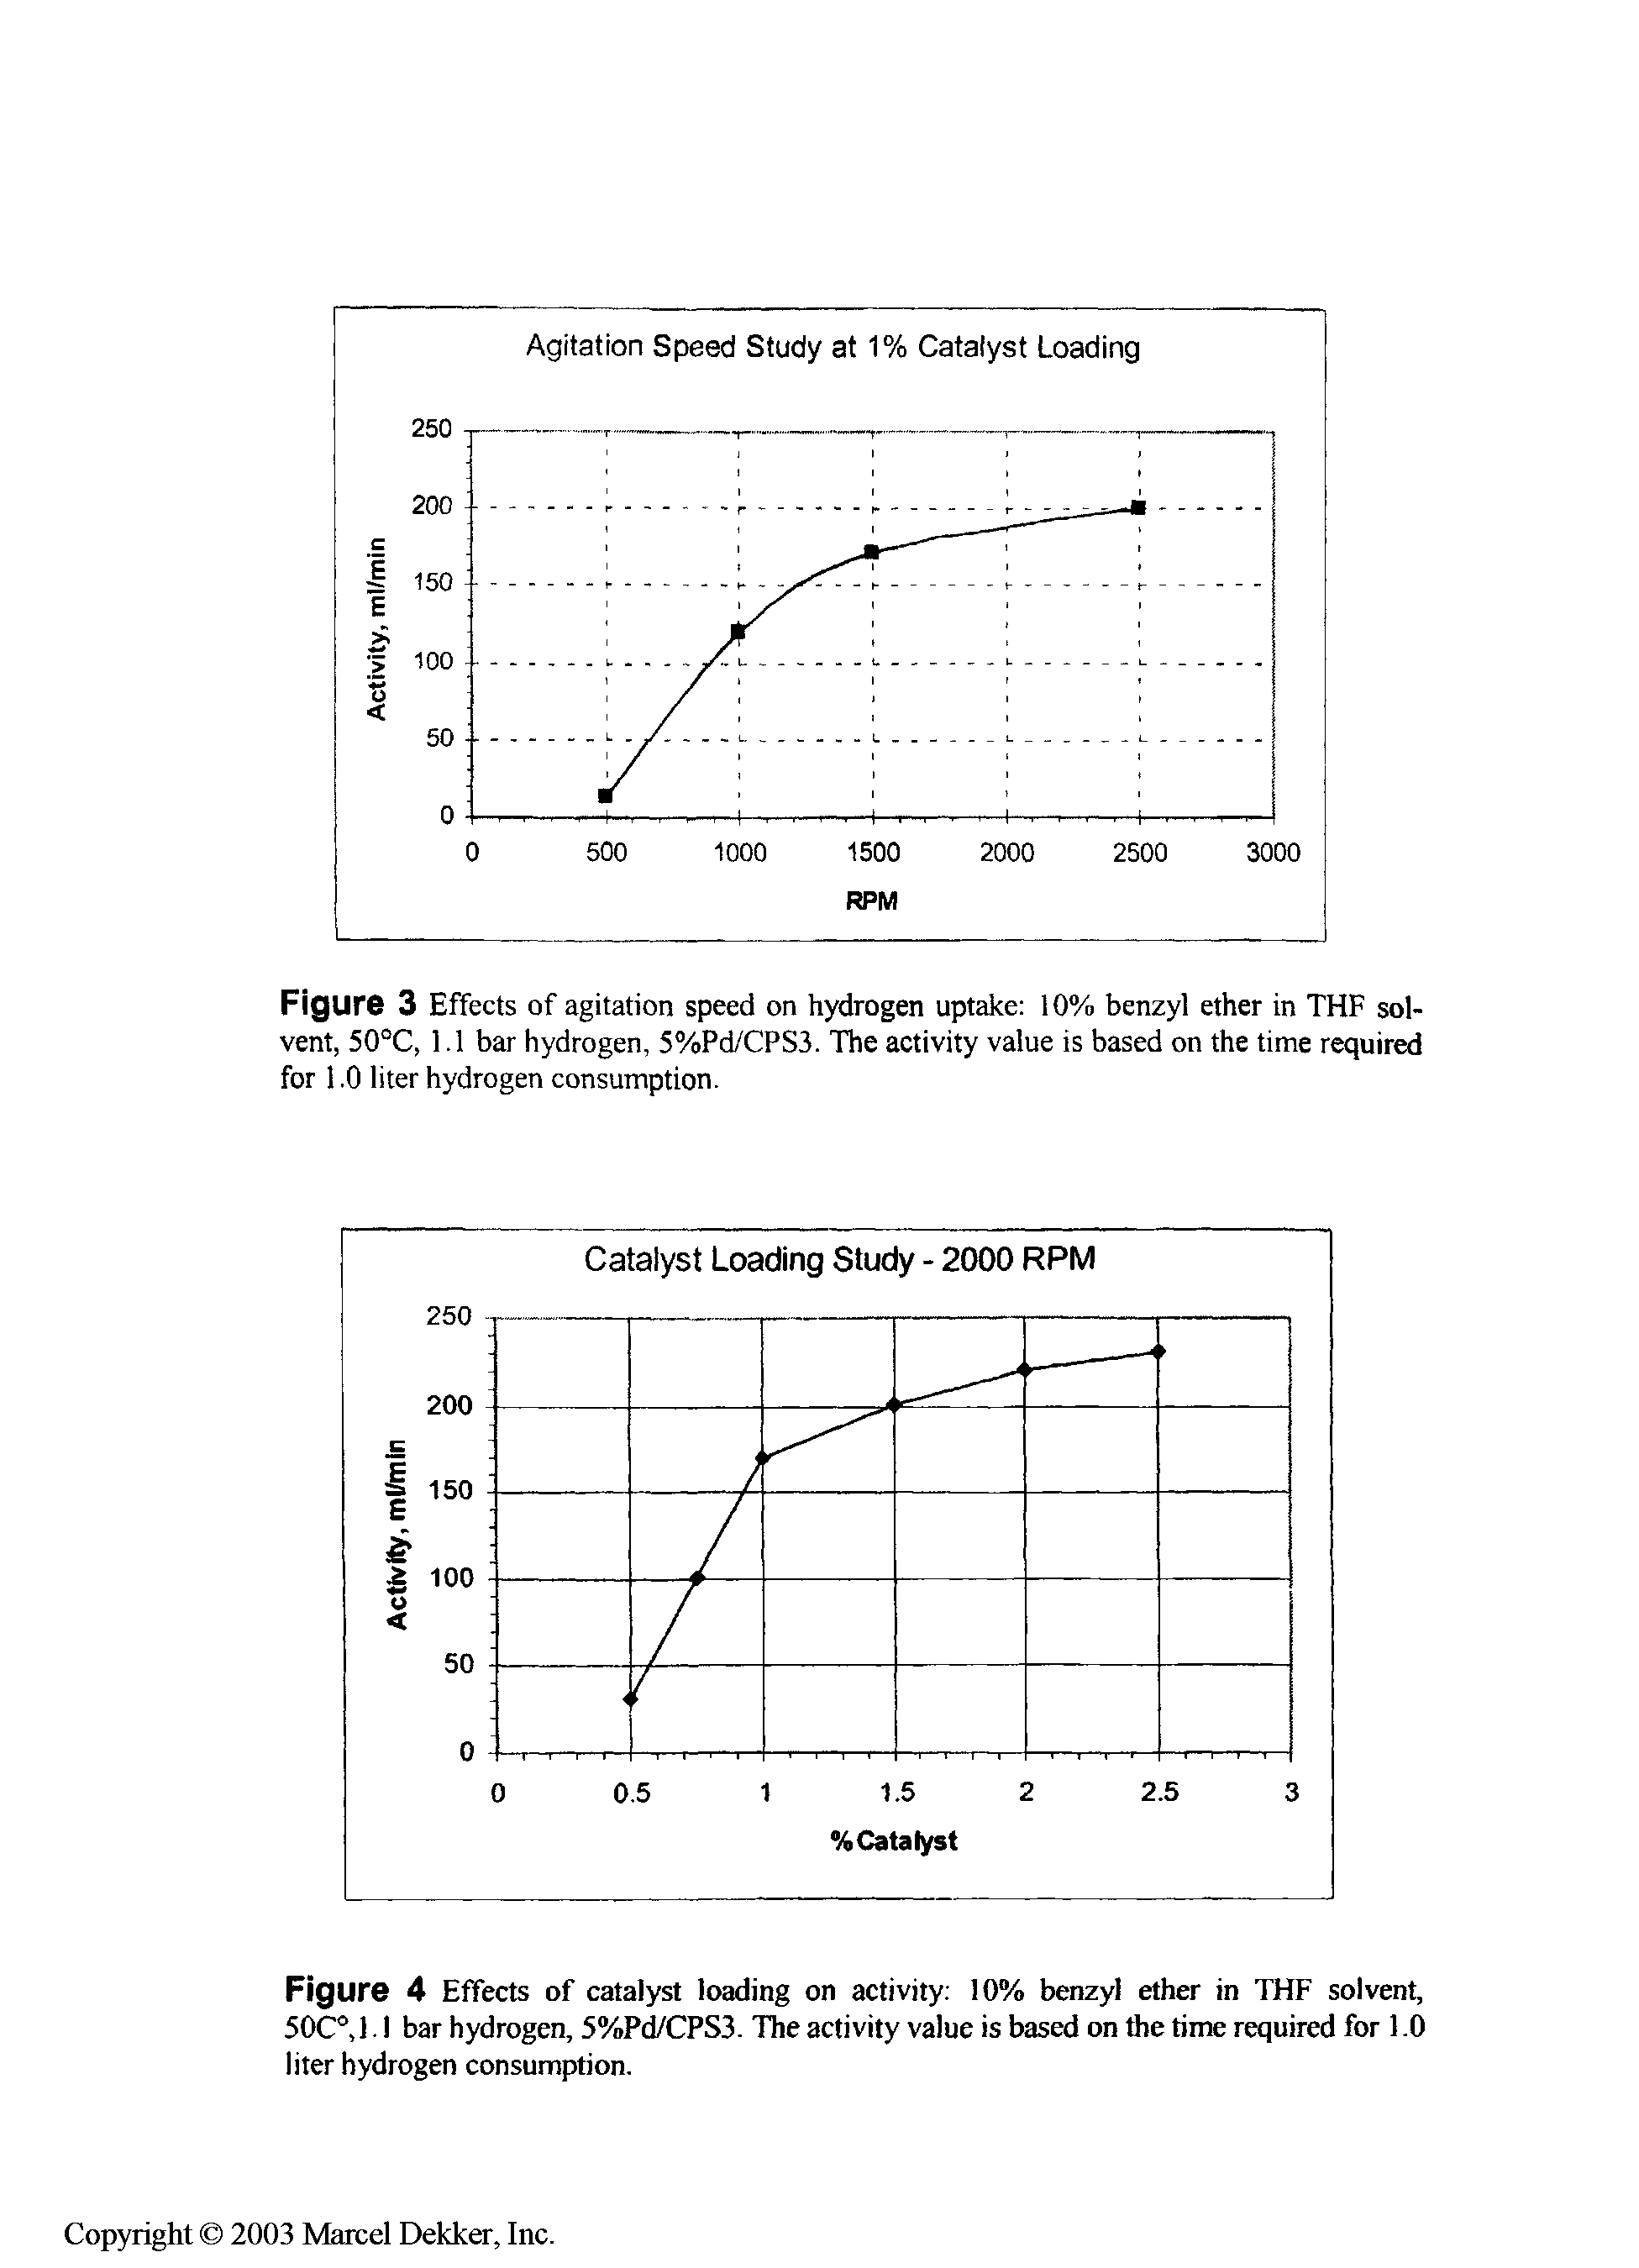 Figure 3 Effects of agitation speed on hydrogen uptake 10% benzyl ether in THE solvent, 50°C, 1.1 bar hydrogen, 5%Pd/CPS3. The activity value is based on the time required for 1.0 liter hydrogen consumption.